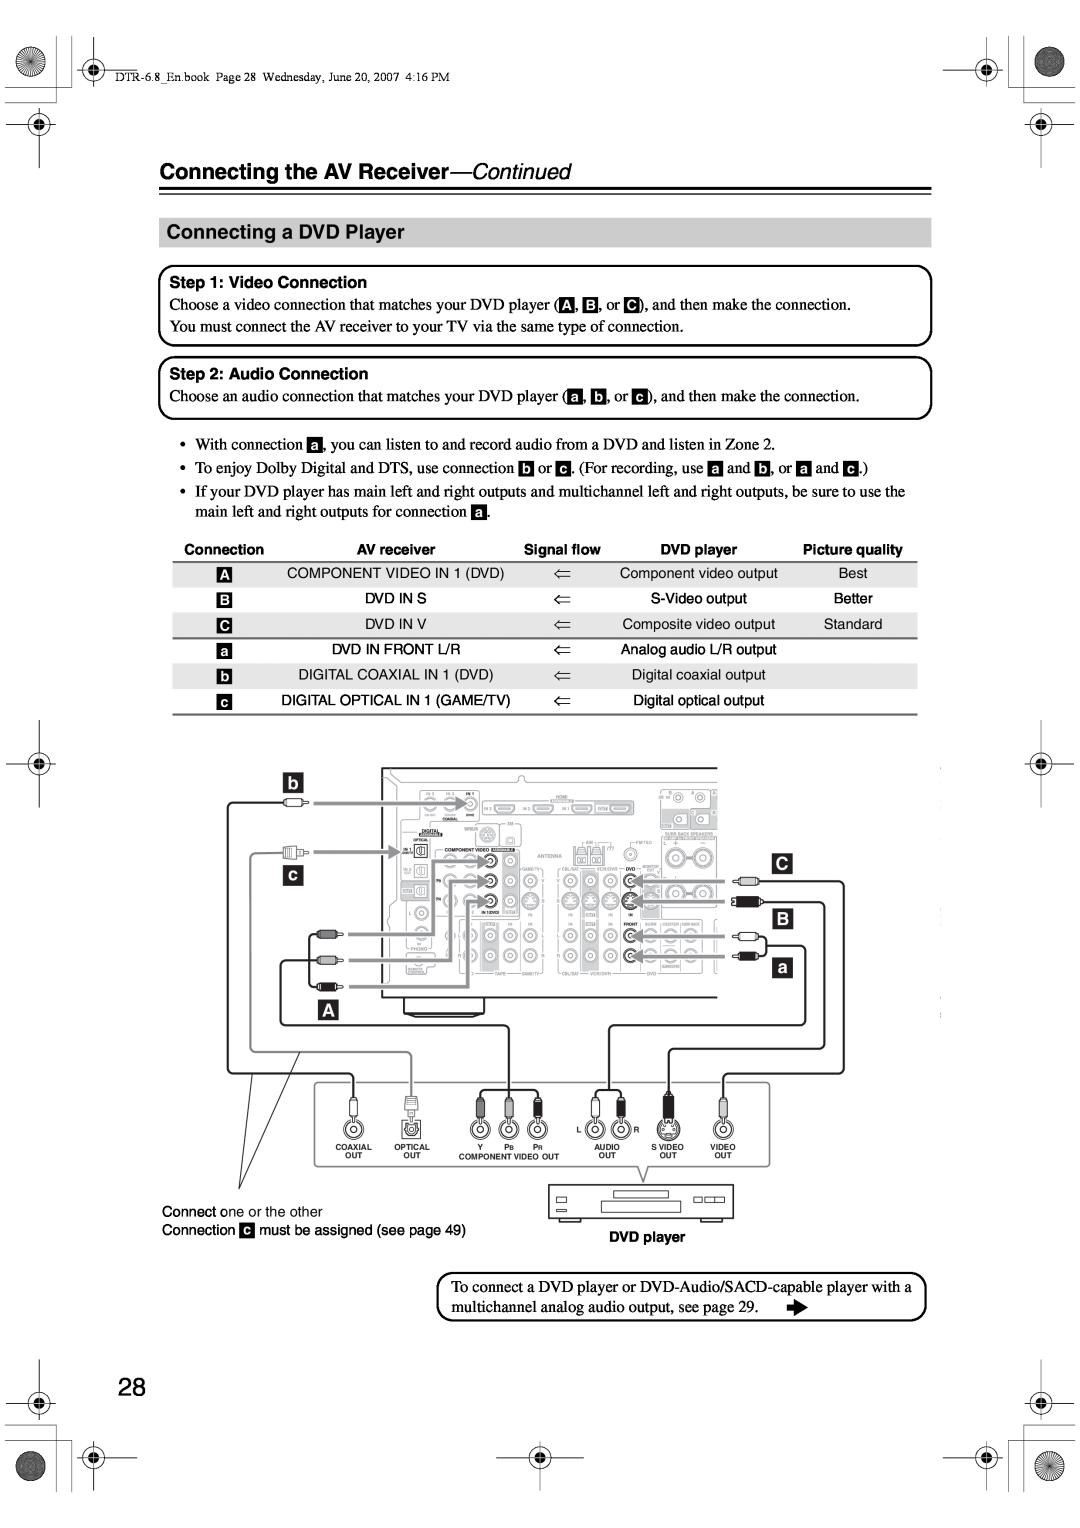 Integra DTR-6.8 instruction manual Connecting a DVD Player, Connecting the AV Receiver—Continued 